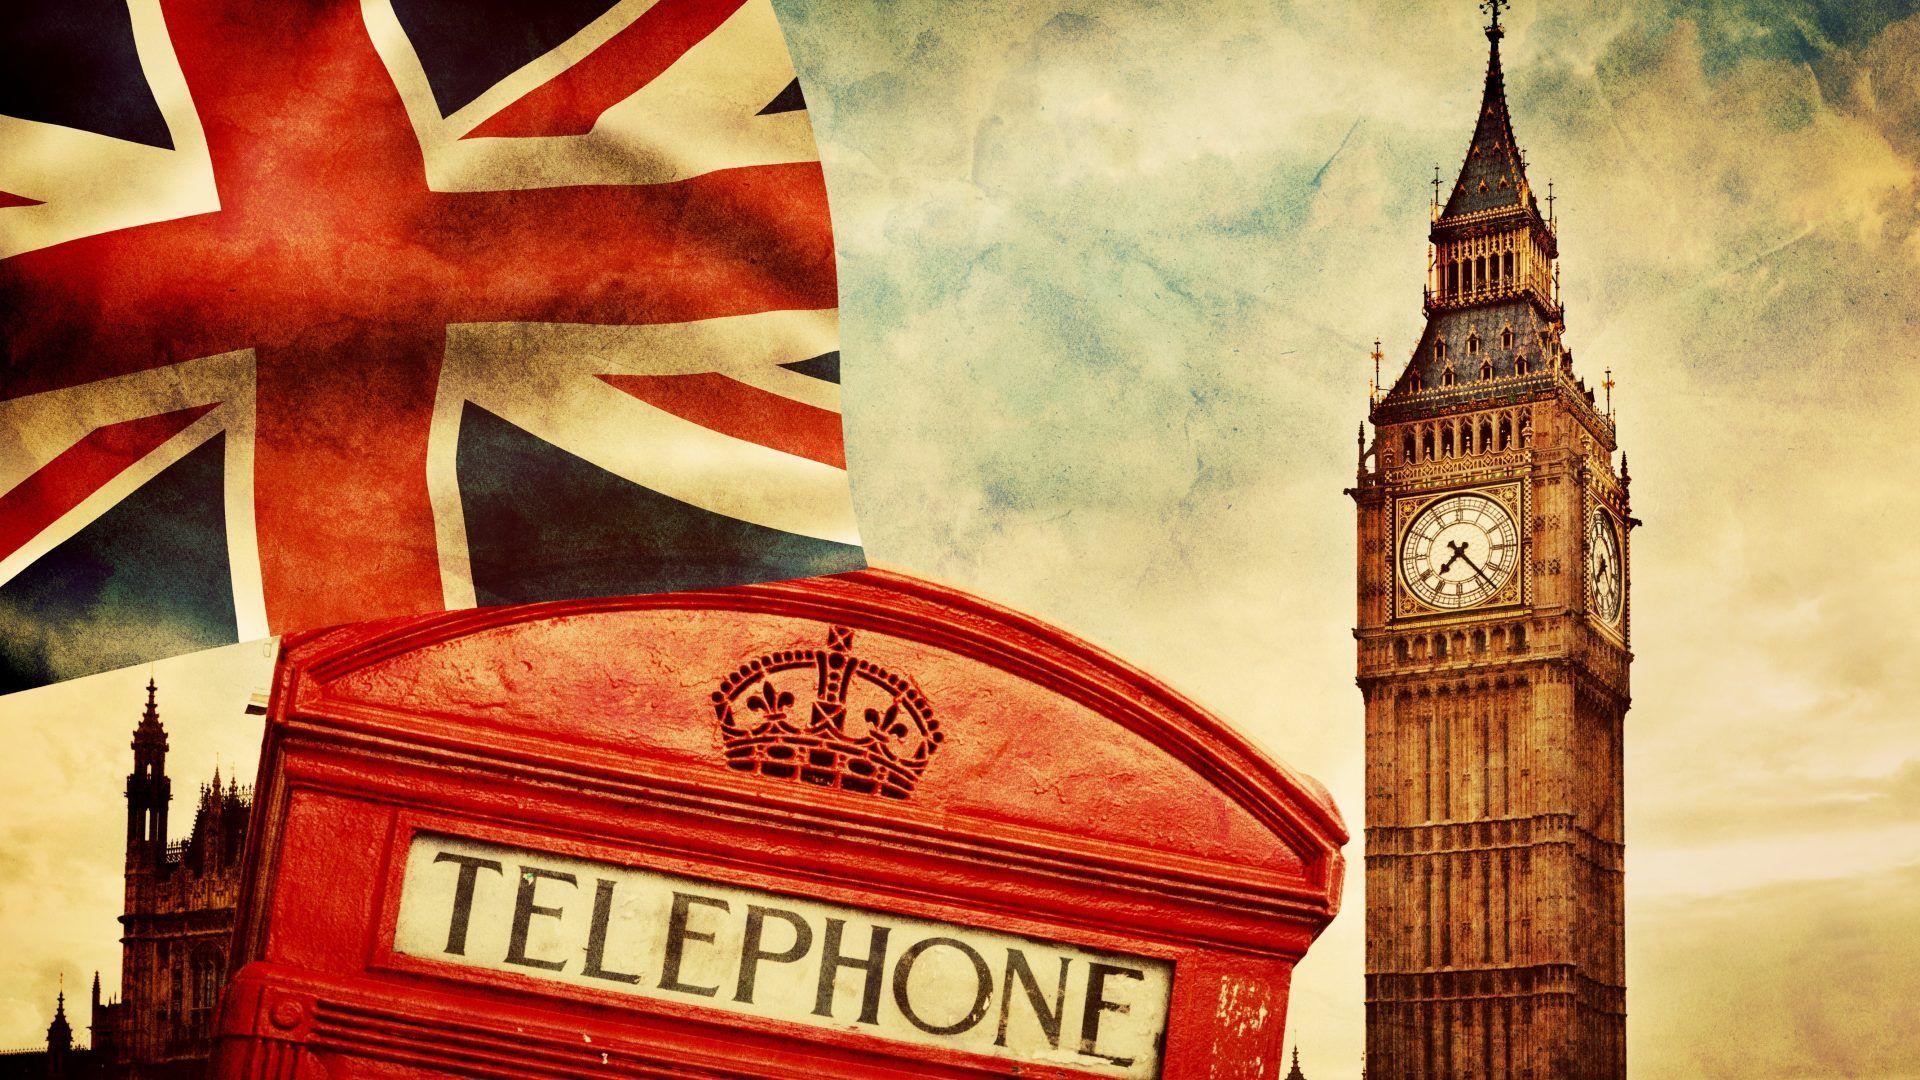 Telephone Tag wallpaper: London Bus City Telephone Street Red